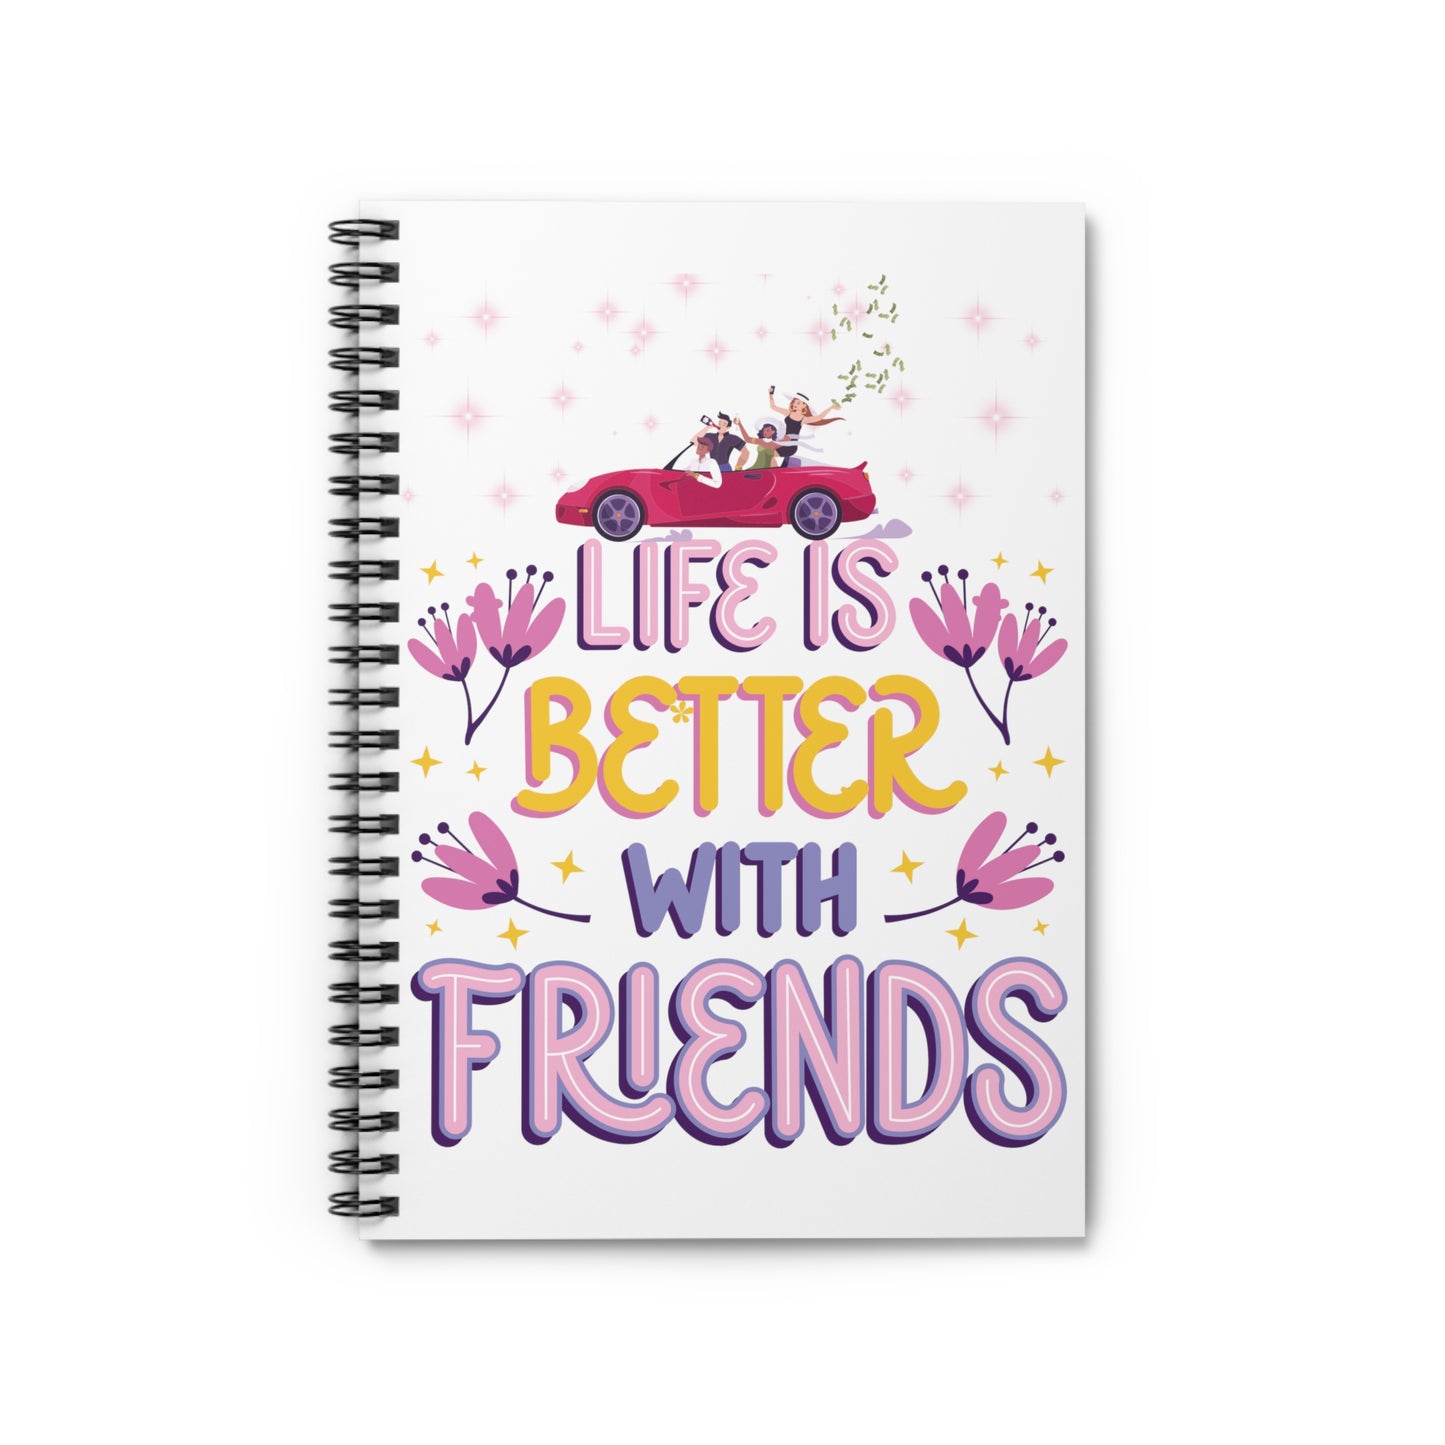 Life Is Better With Friends With Cash Spiral Notebook - Ruled Line - Perfect Gift - Good Friends